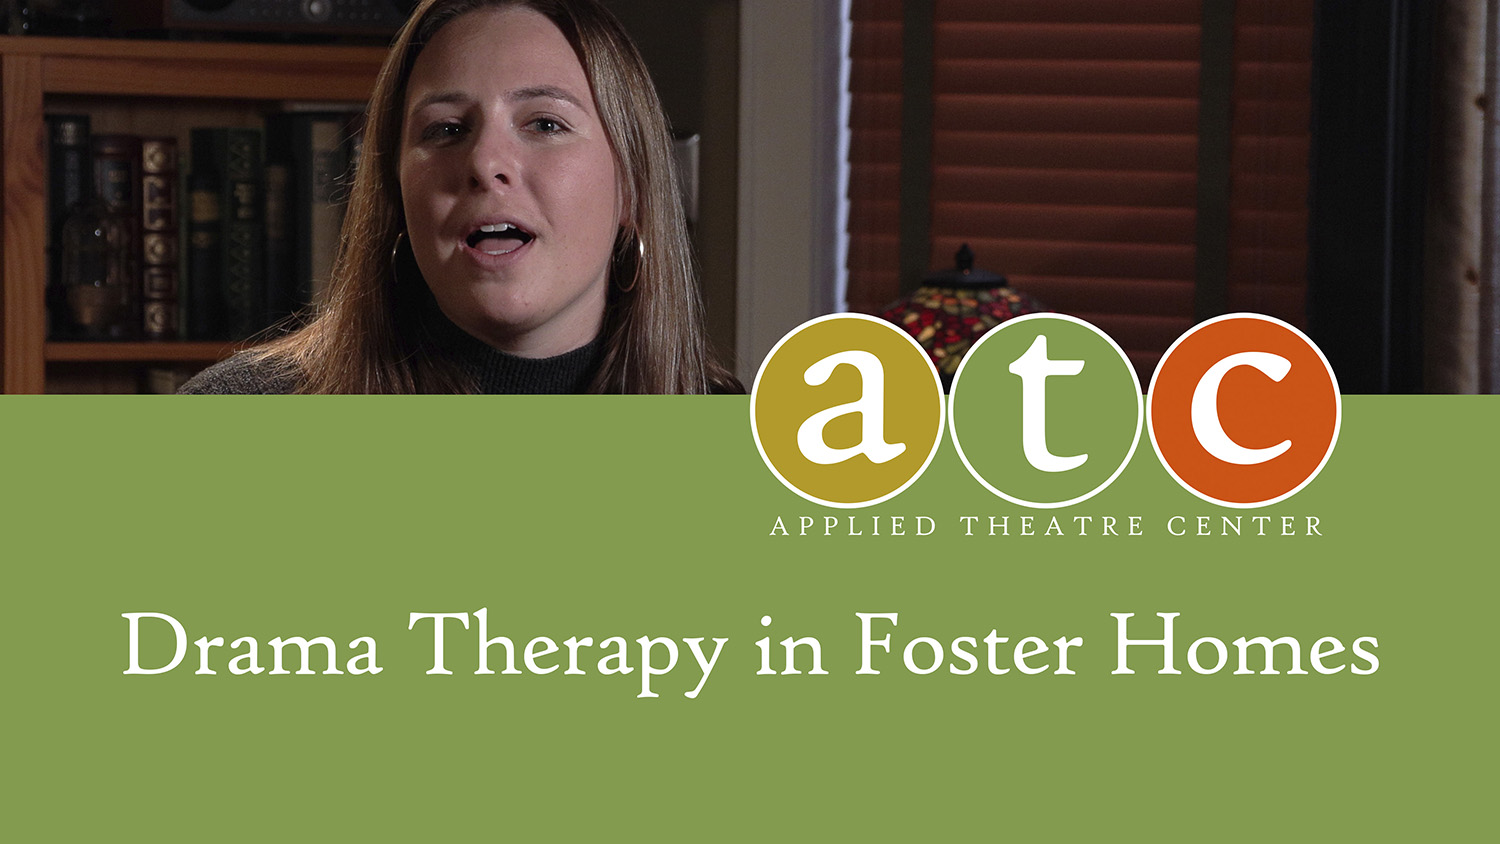 DRAMA THERAPY IN FOSTER HOMES